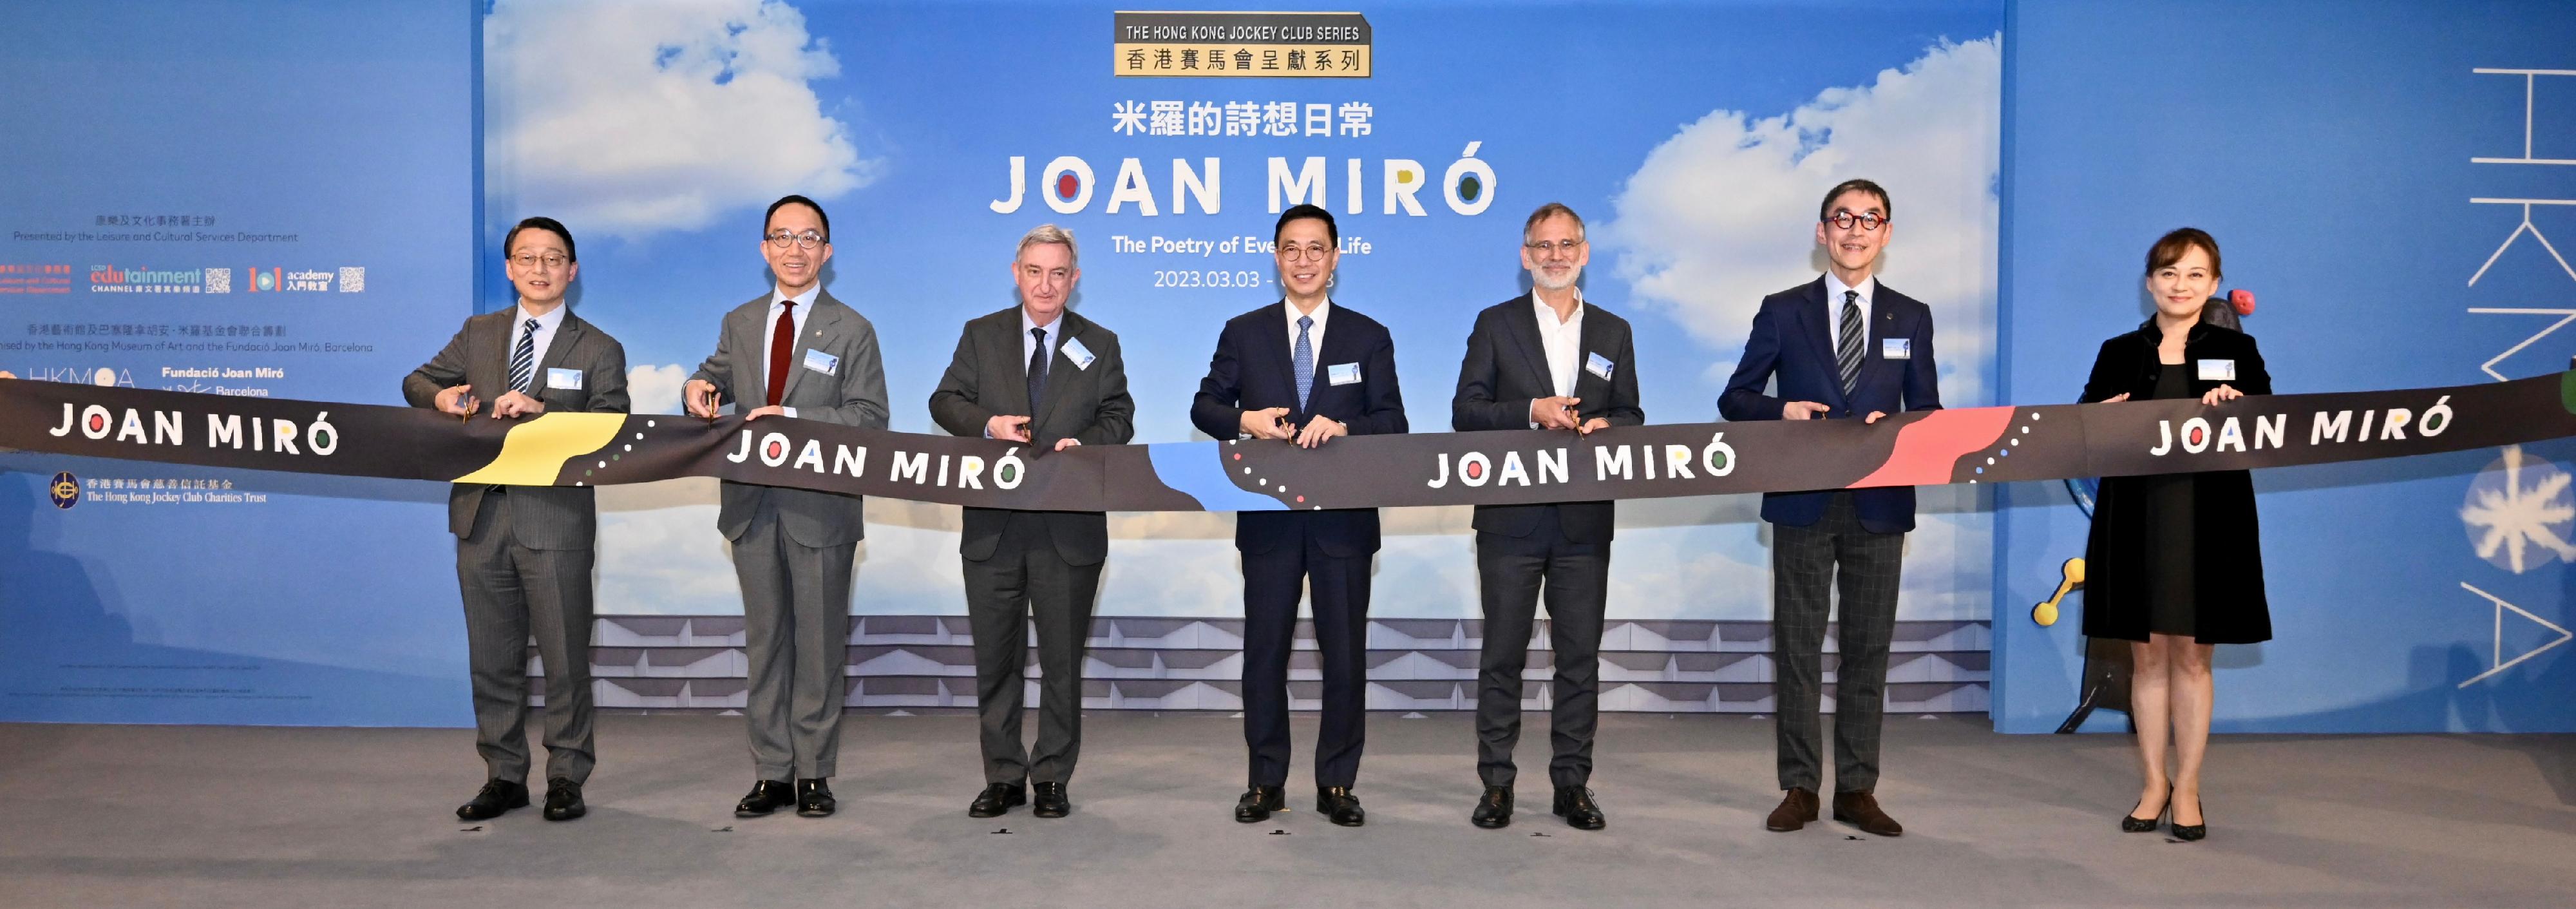 "The Hong Kong Jockey Club Series: Joan Miró — The Poetry of Everyday Life" exhibition will be held at the Hong Kong Museum of Art (HKMoA) starting from tomorrow (March 3). Picture shows the officiating guests at the opening ceremony held today (March 2) included (from left) the Director of Leisure and Cultural Services, Mr Vincent Liu; the Executive Director of Charities and Community of the Hong Kong Jockey Club, Dr Gabriel Leung; the Ambassador of the Kingdom of Spain to the People's Republic of China, Mr Rafael Dezcallar de Mazarredo; the Secretary for Culture, Sports and Tourism, Mr Kevin Yeung; the Director of the Fundació Joan Miró, Dr Marko Daniel; the Chairman of the Museum Advisory Committee, Mr Douglas So; and the Museum Director of the HKMoA, Dr Maria Mok.